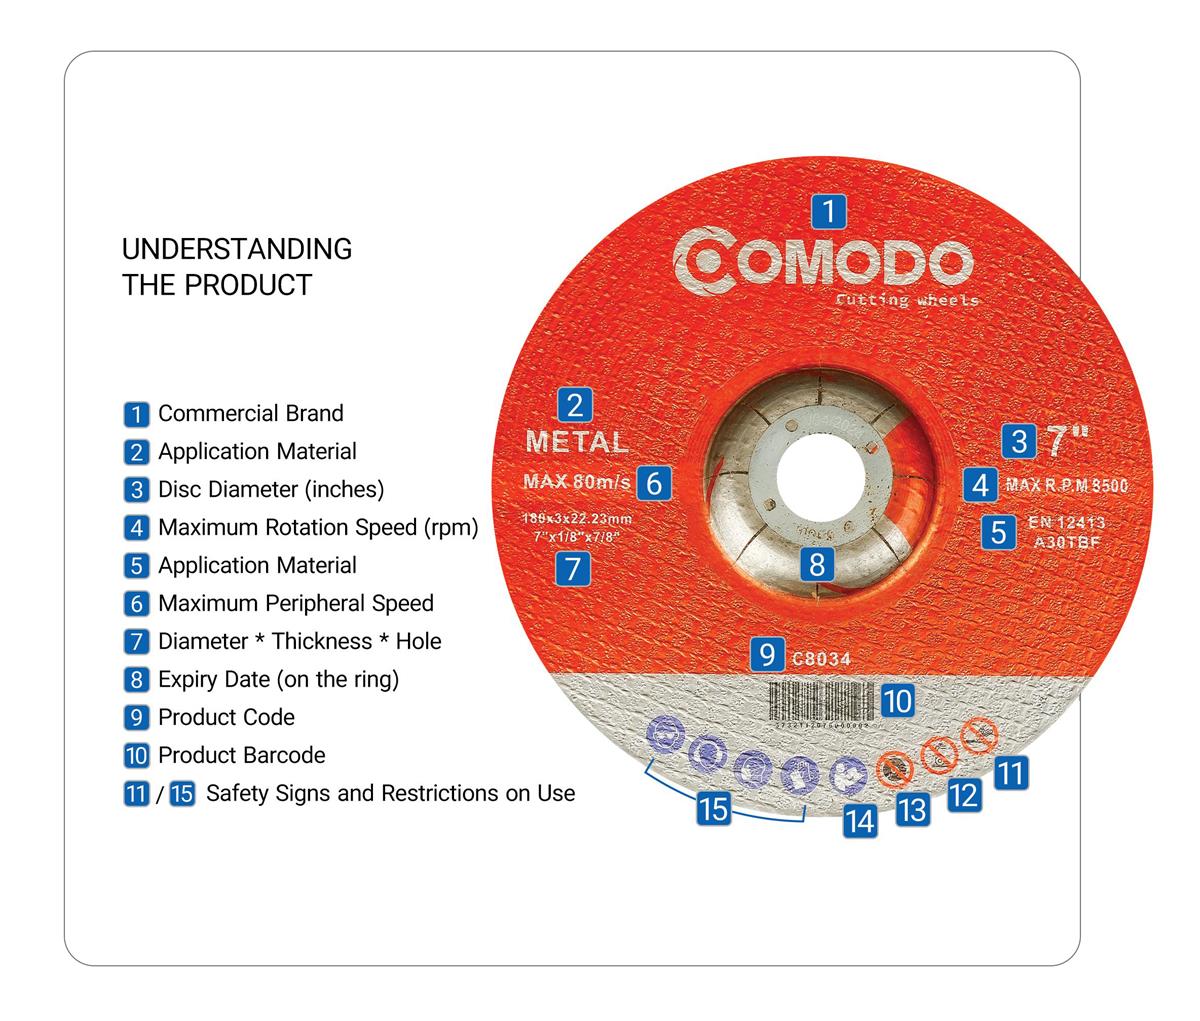 Understanding the Comodo cutting and grinding discs lable